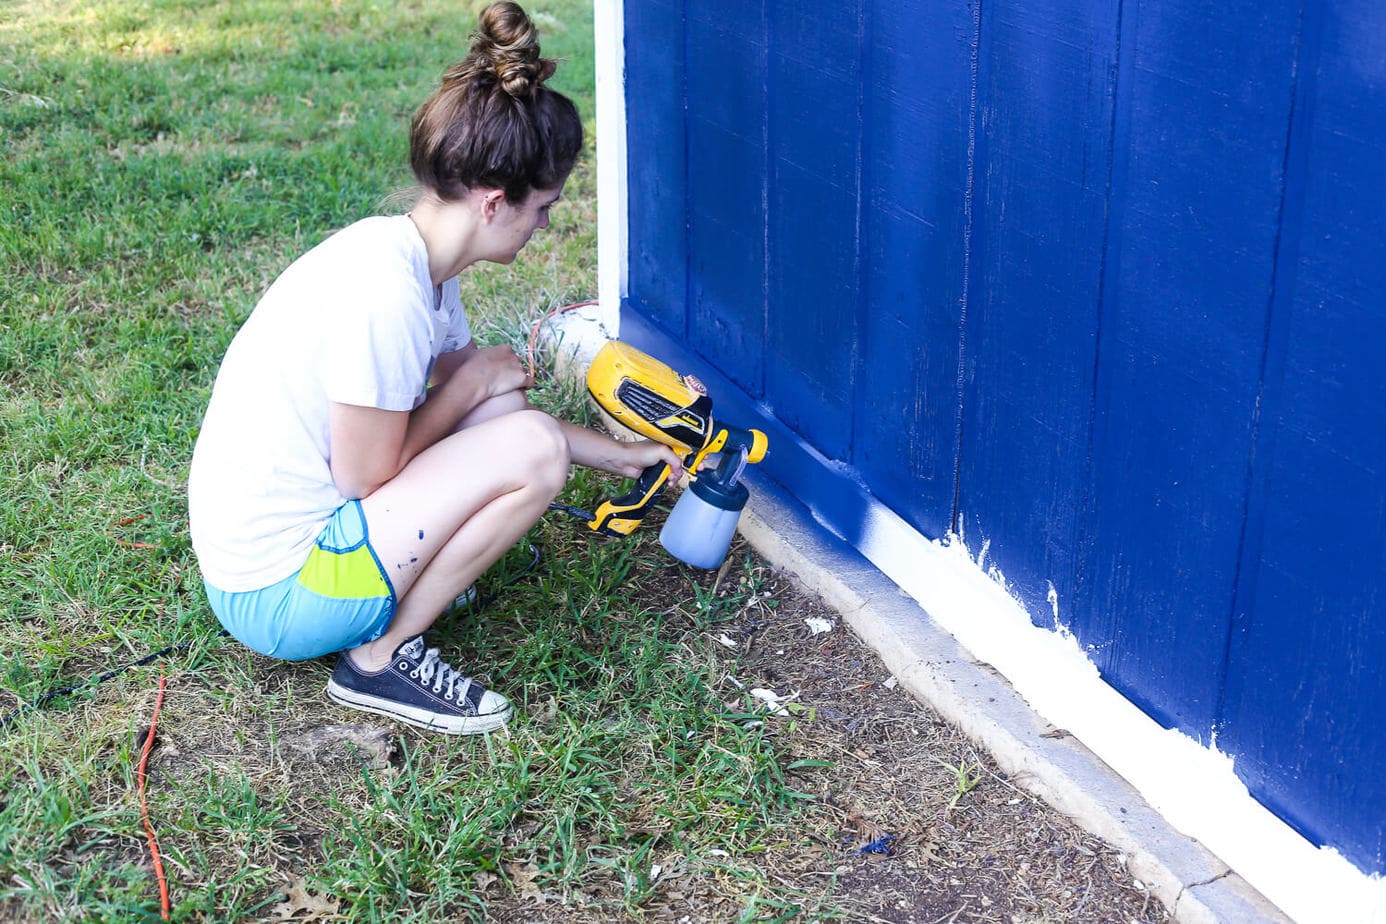 How to paint an exterior building using a paint sprayer - it will make a huge difference in how your entire yard looks and feels! 